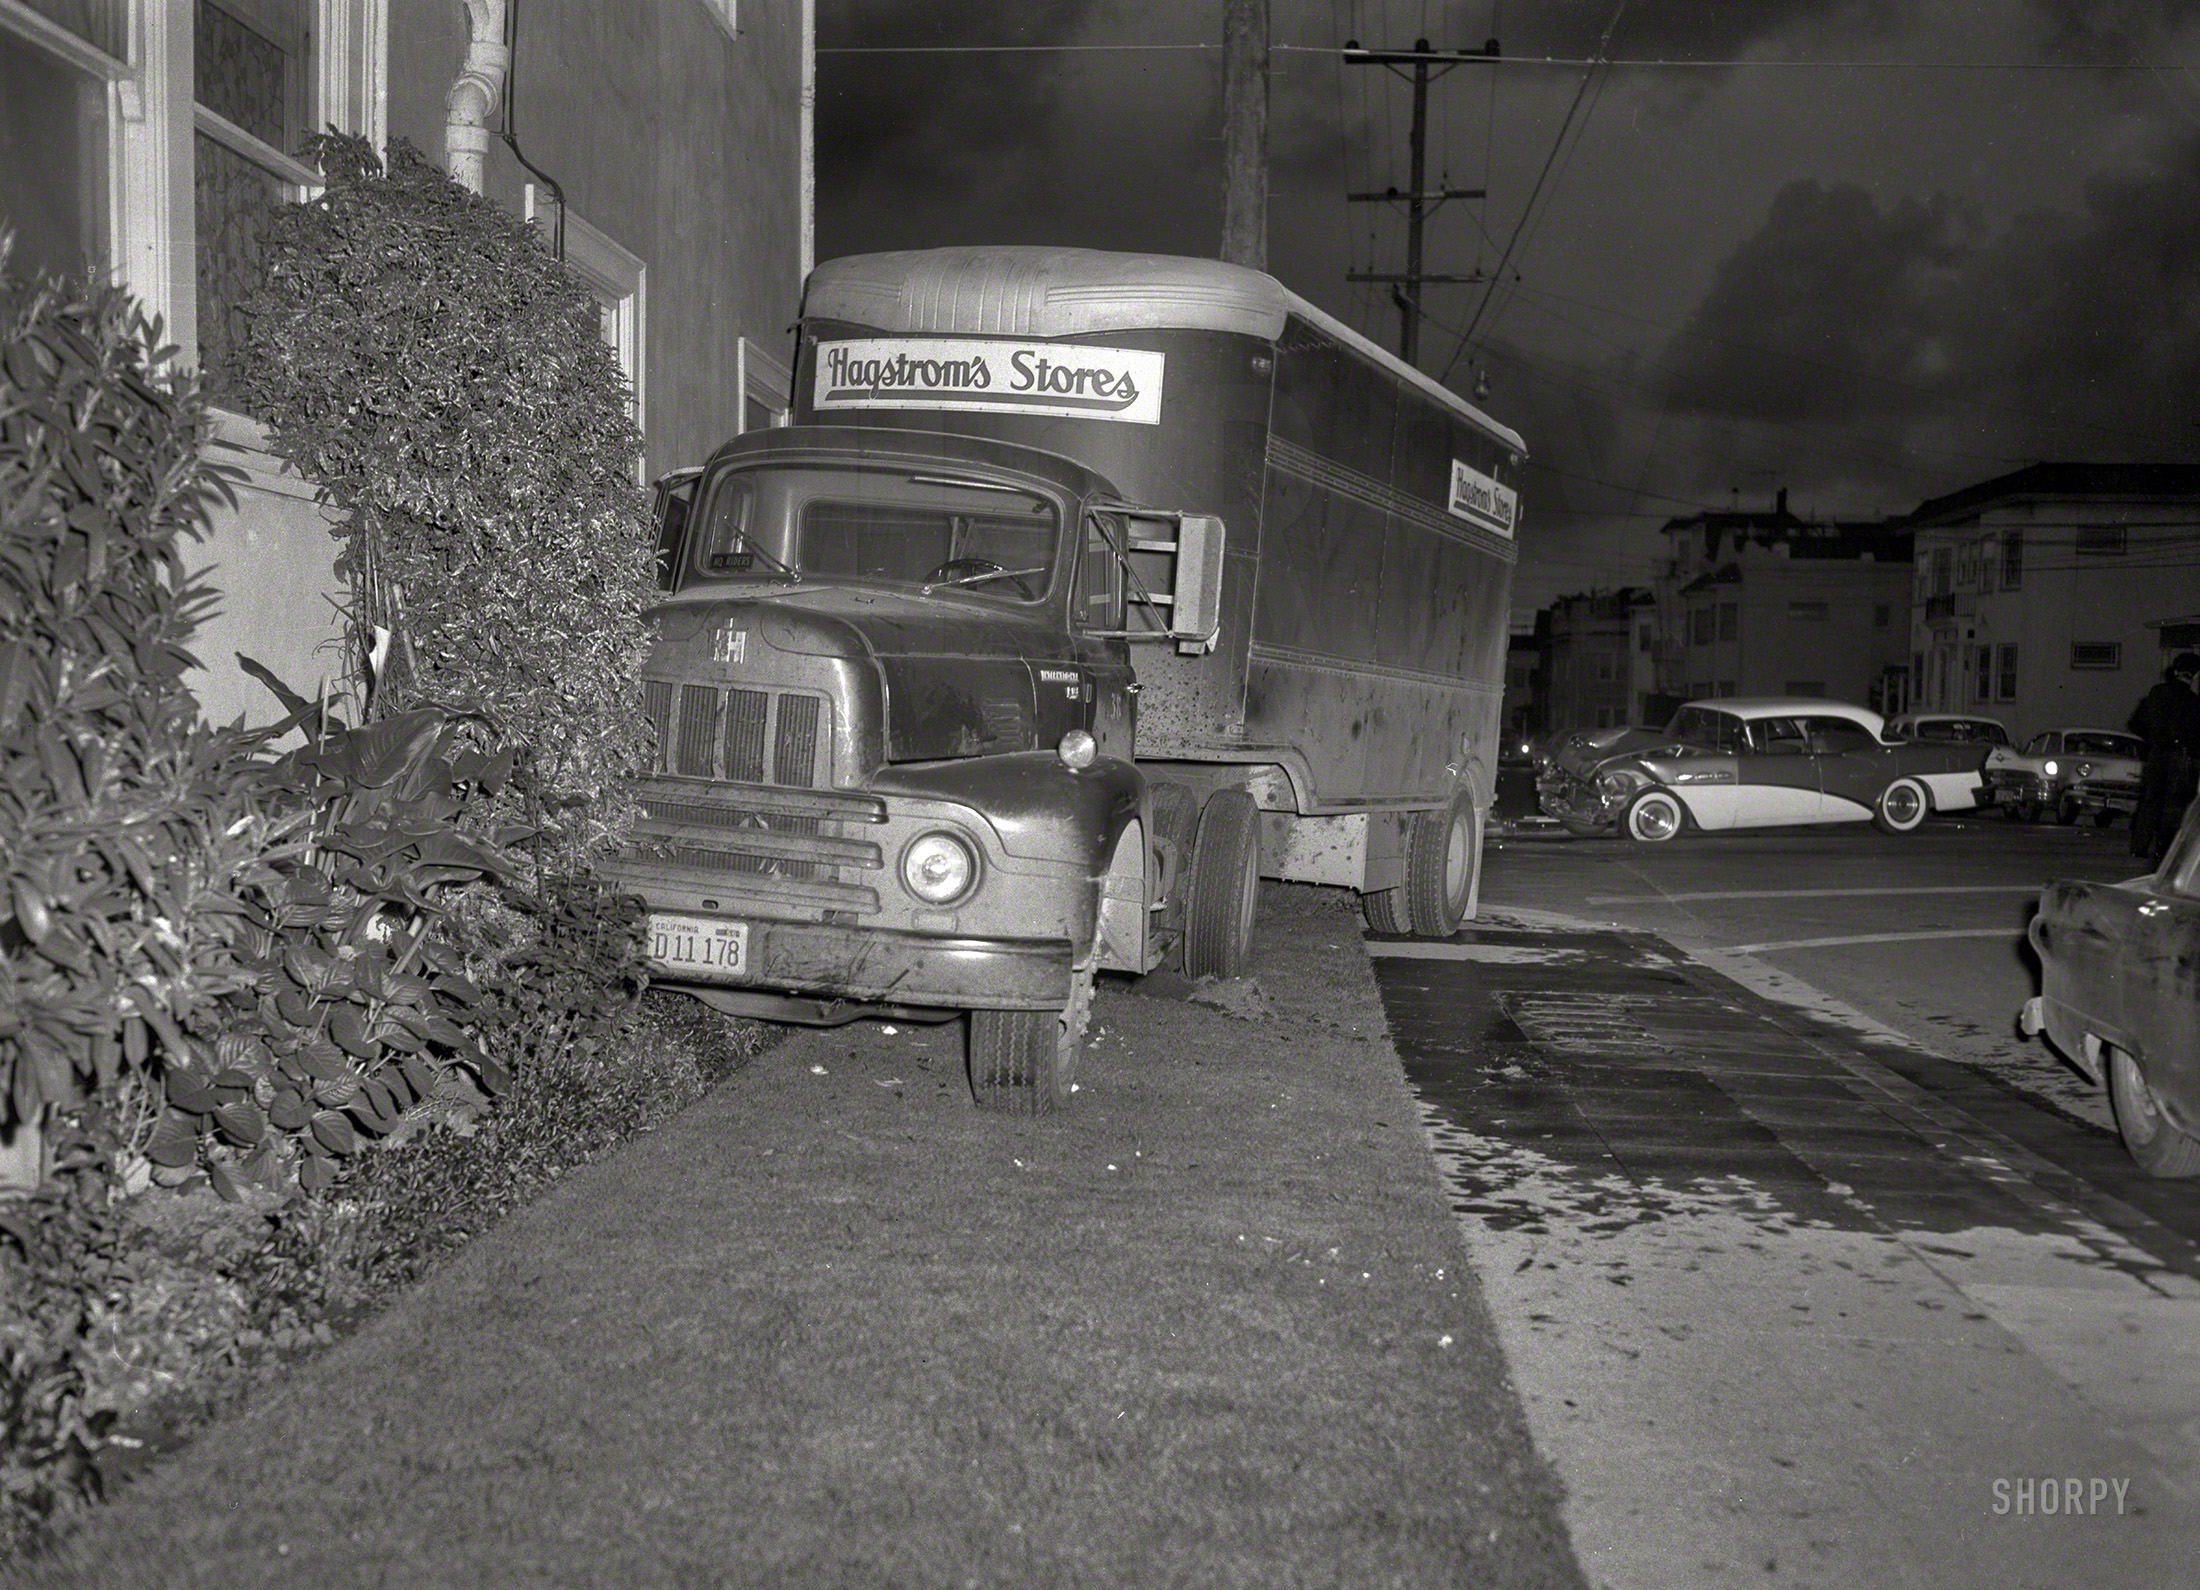 Oakland circa 1956 and another motoring mishap, with yet another guilty-looking Buick. 4x5 acetate negative from the News Photo Archive. View full size.